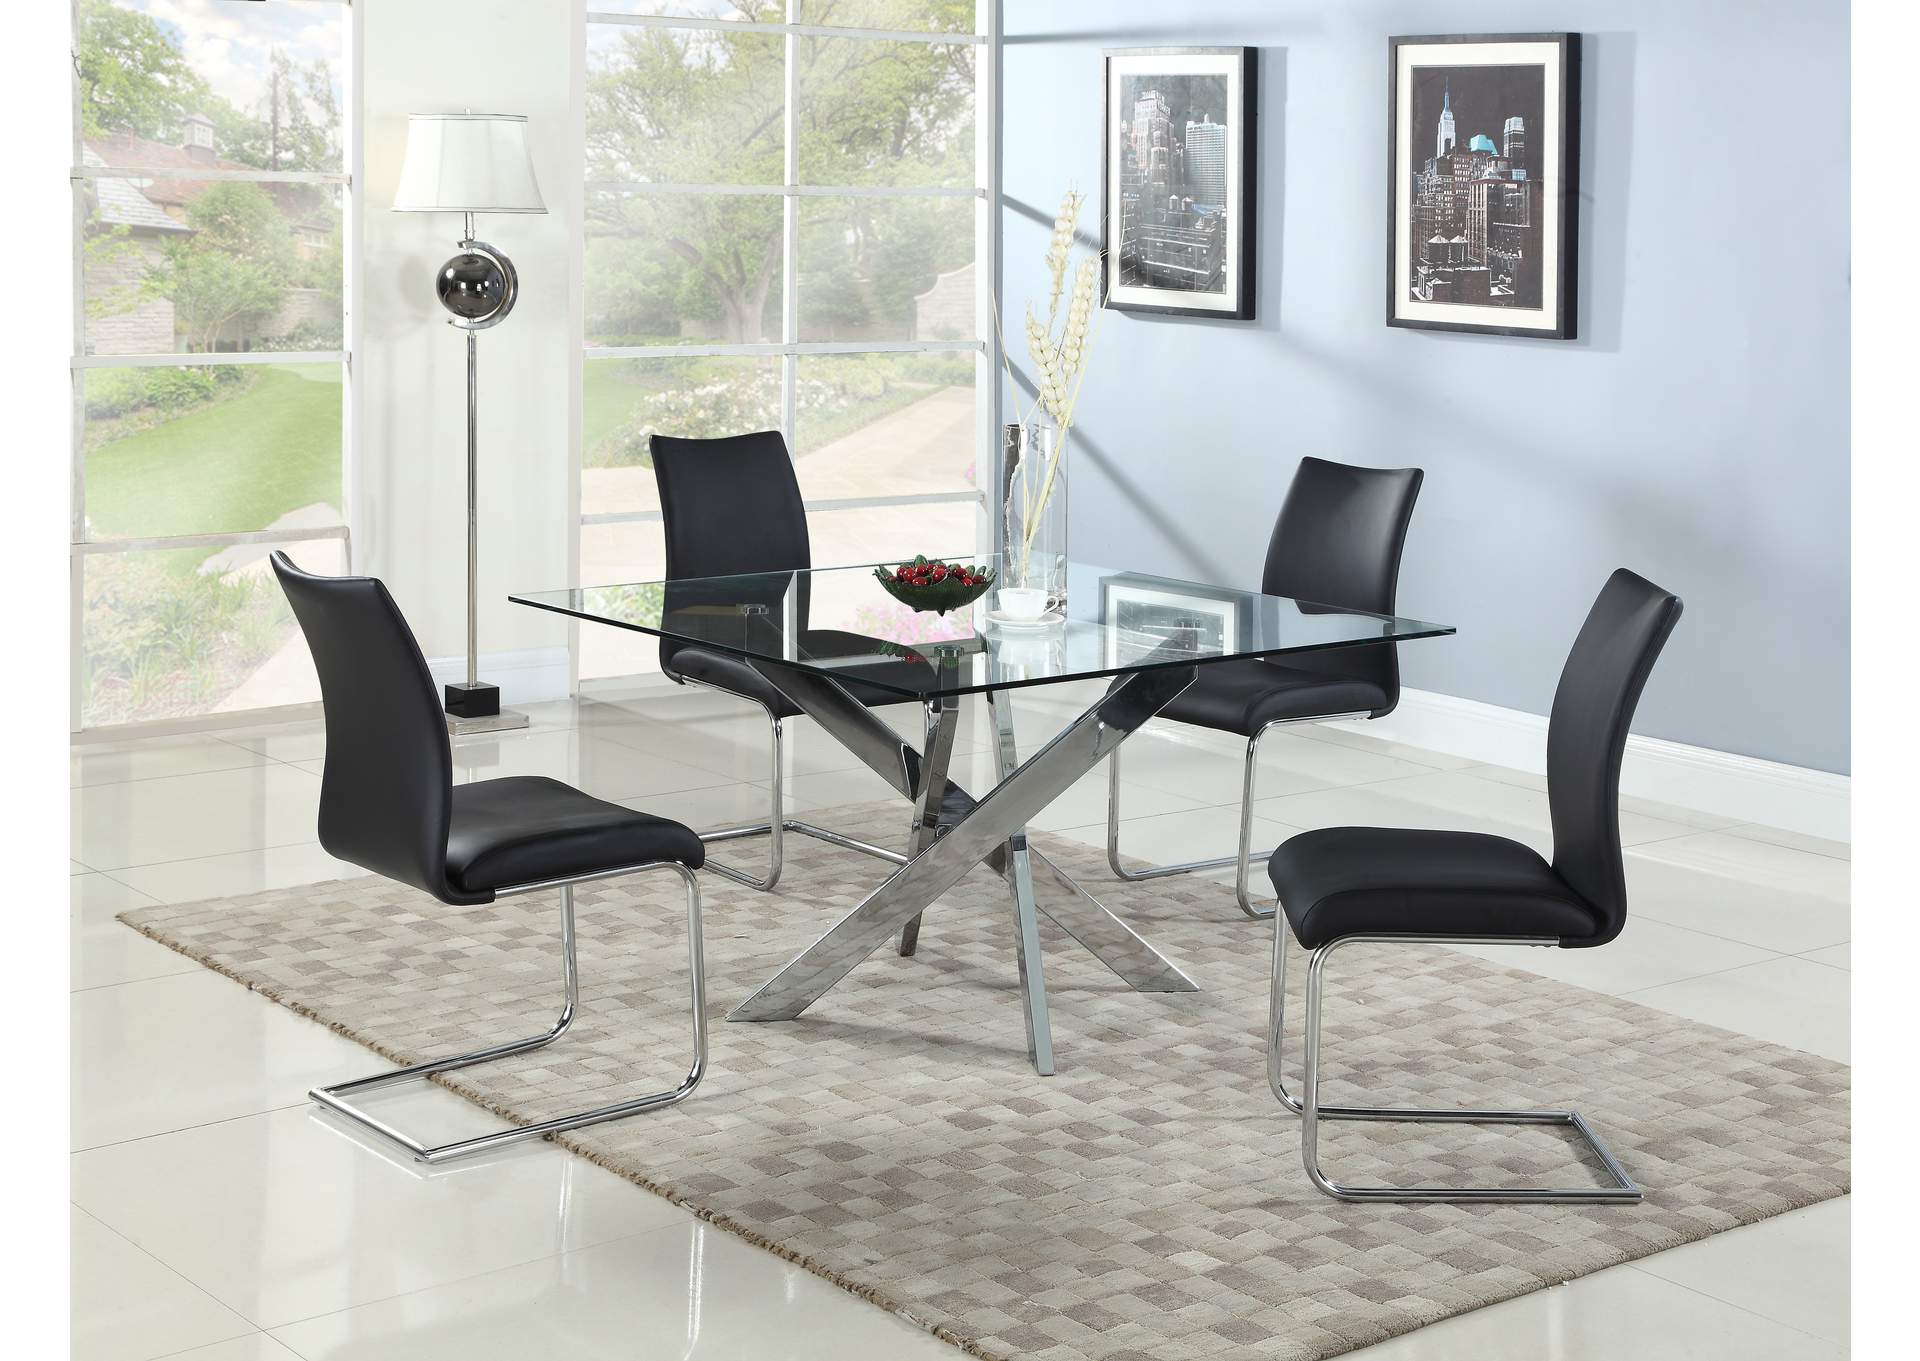 Pixie 5 Piece Dining Set w/ 4 Chairs,Chintaly Imports